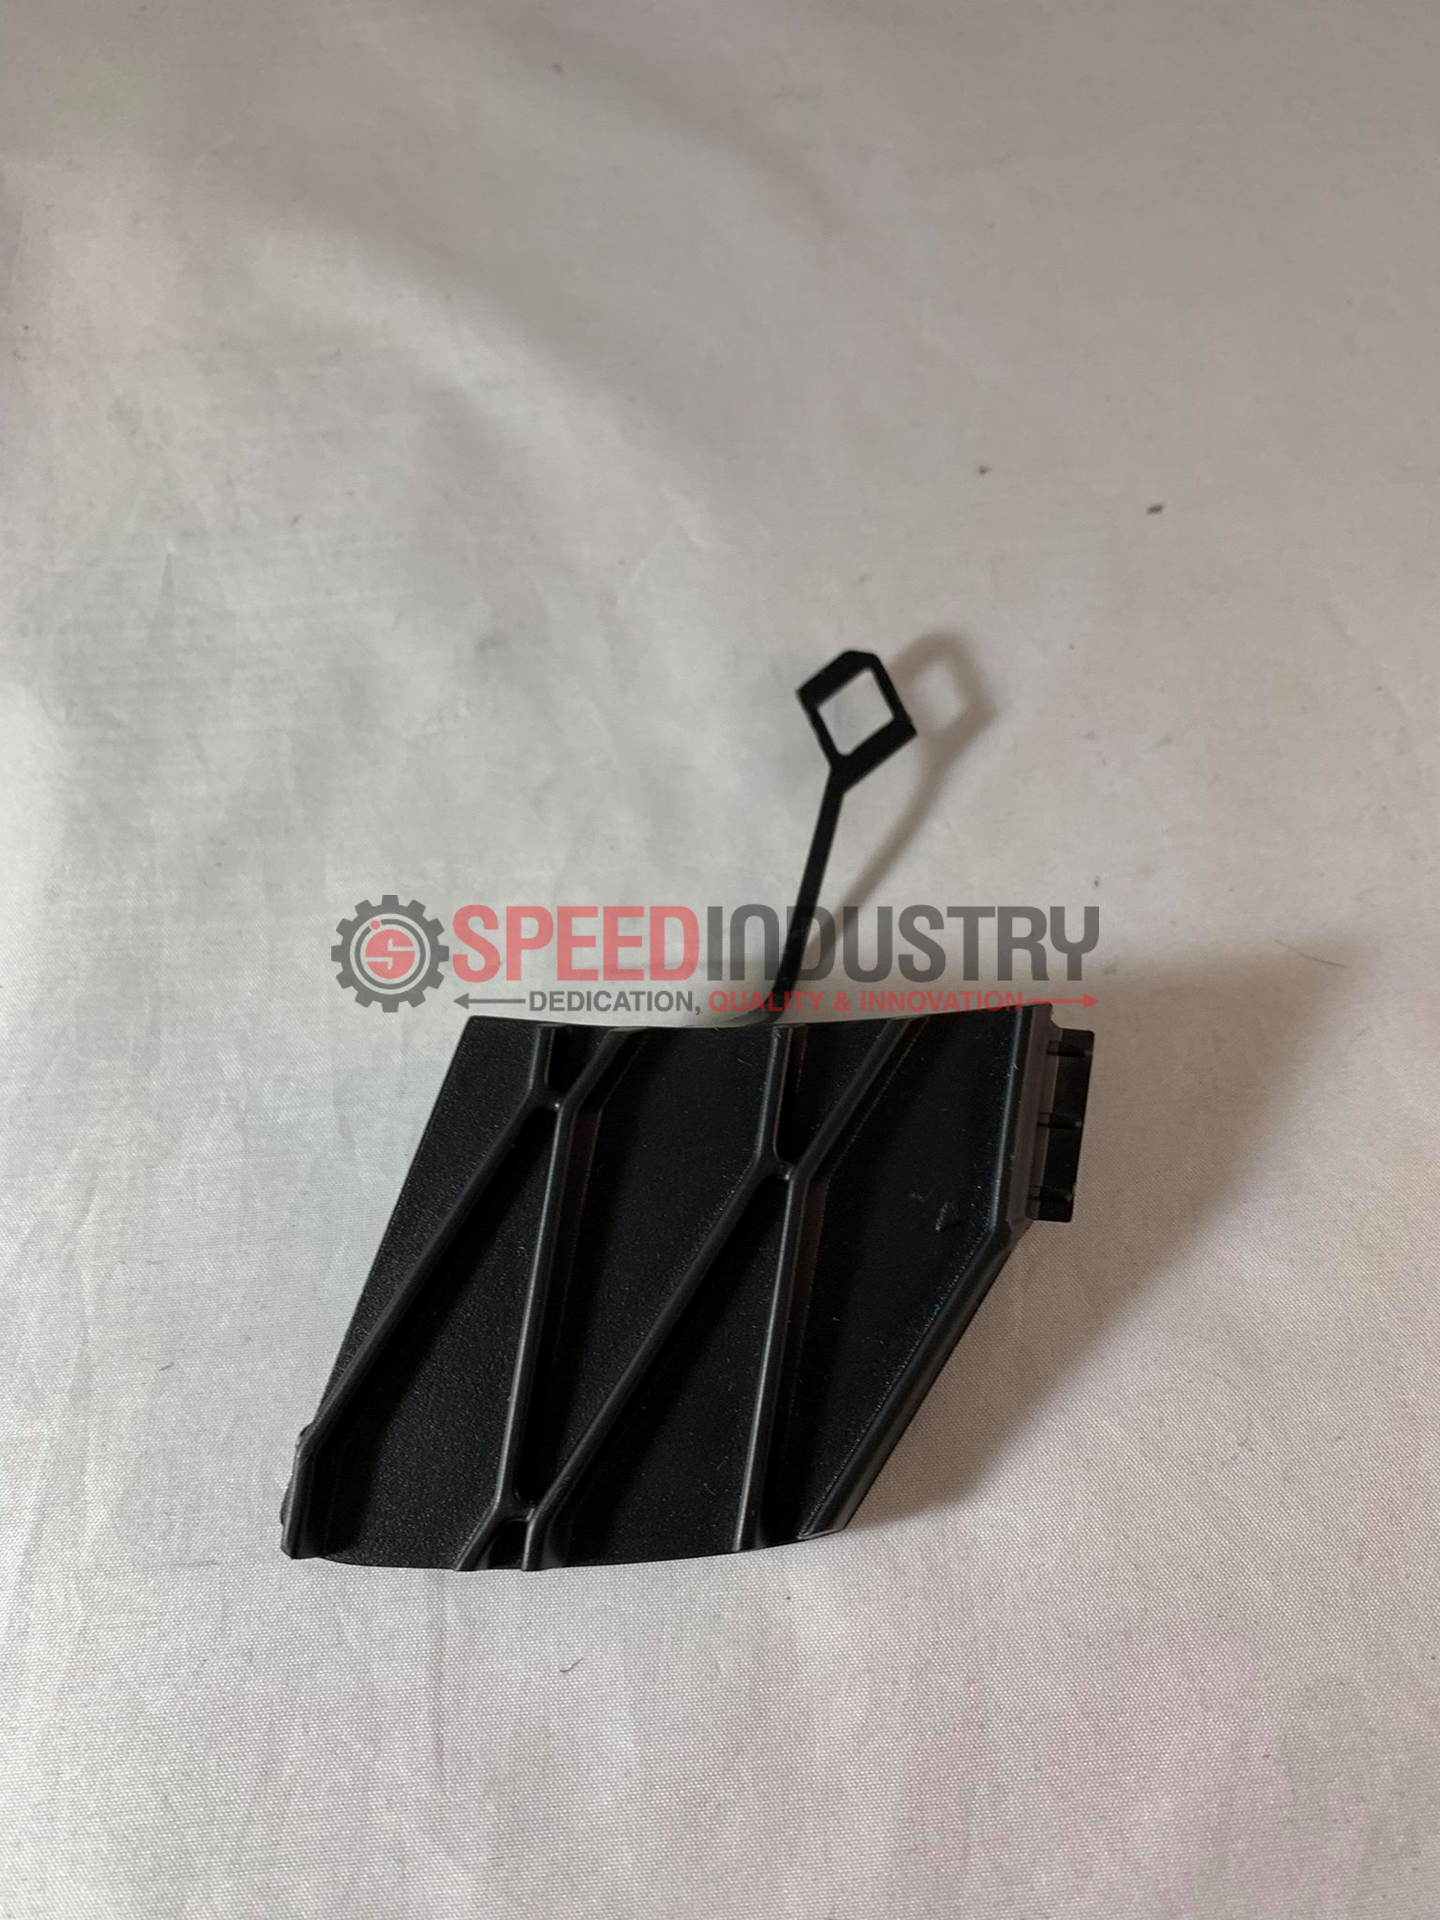 https://speedindustry.com/images/thumbs/w_1_0012178_oem-front-tow-hook-cover-a90-mkv-supra-gr-2020.jpeg